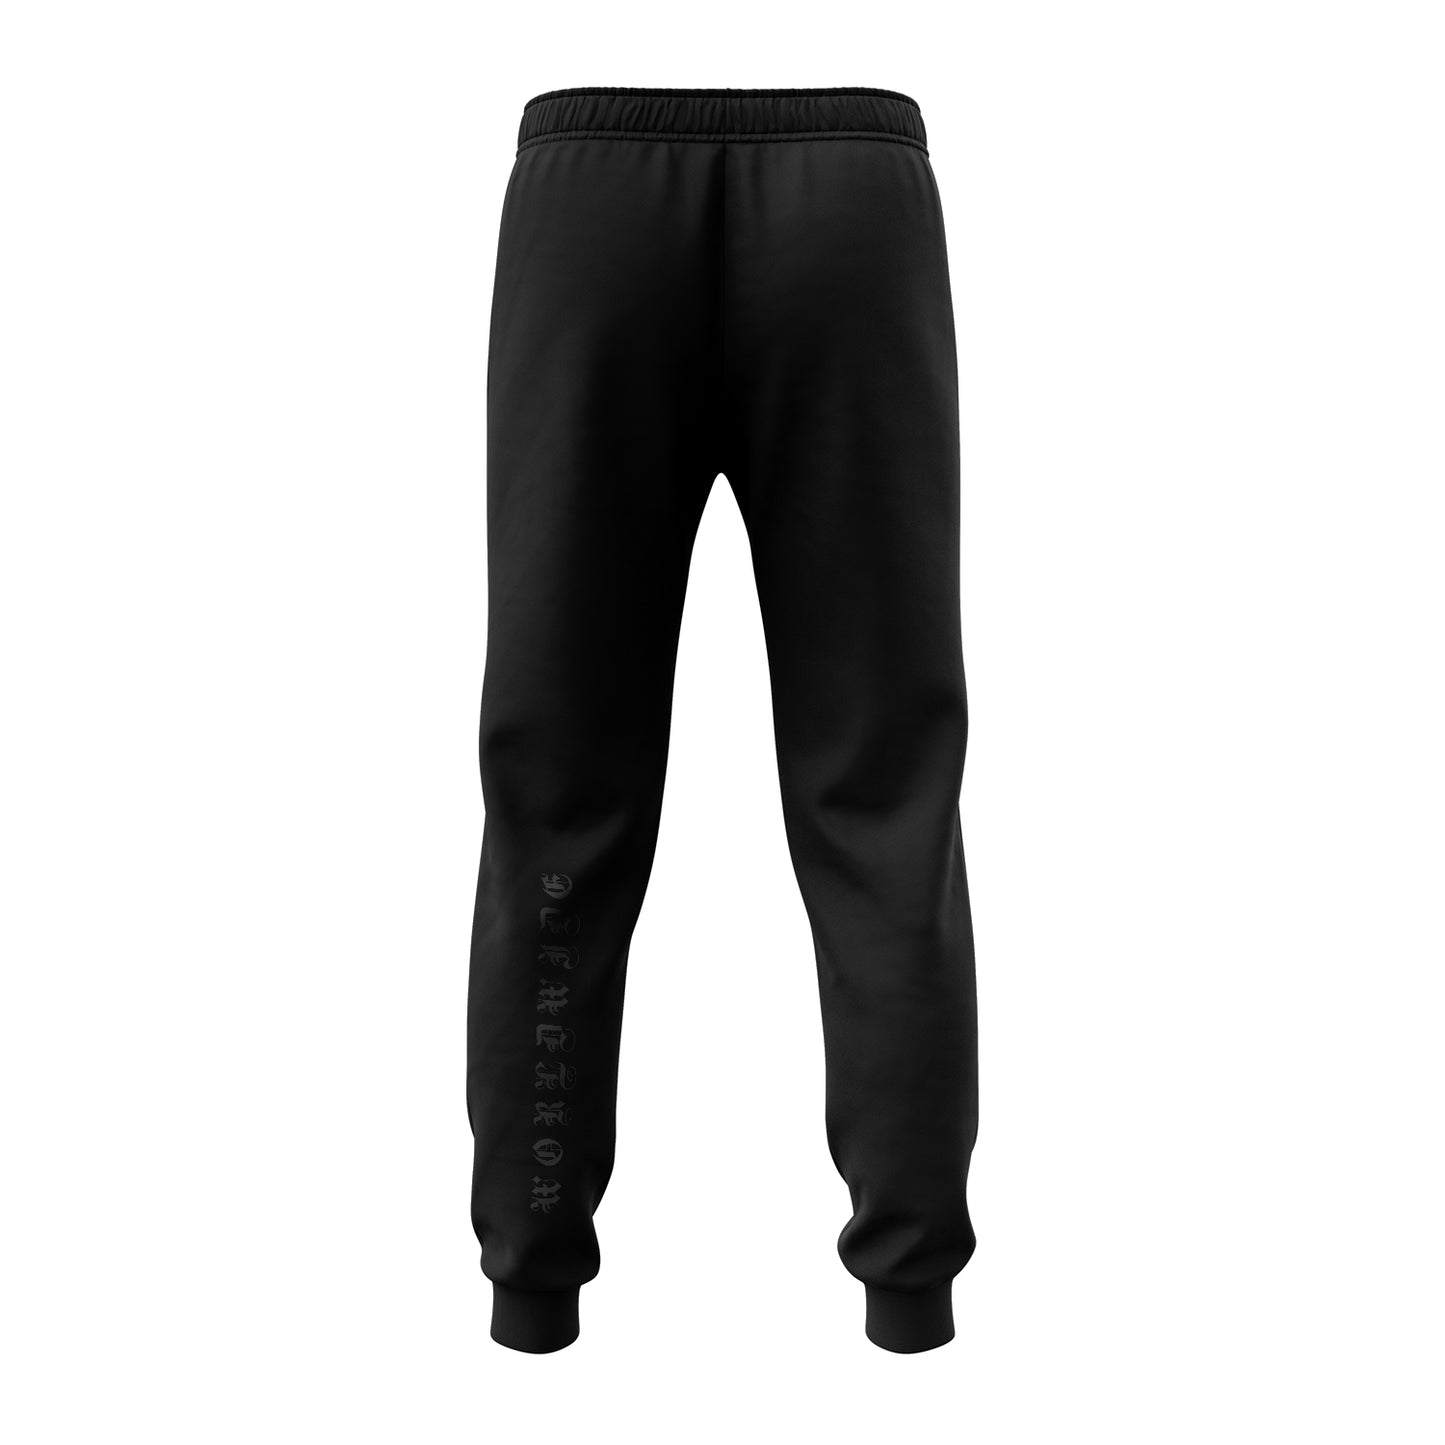 IVMS World Joggers